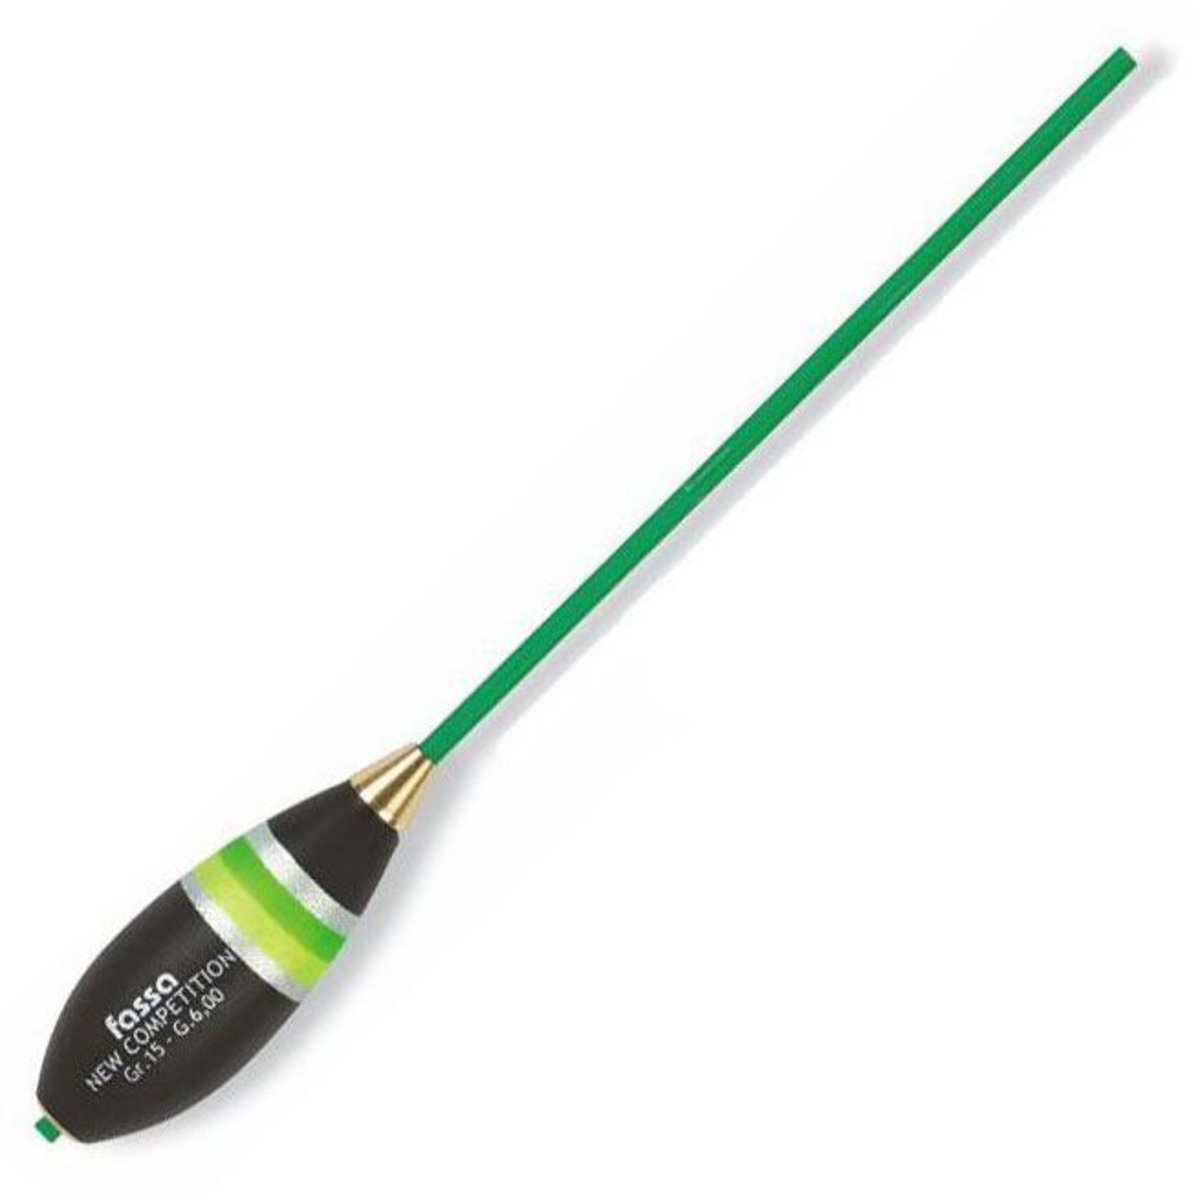 Fassa Bombarde Forelle New Competition Green - 12 g - 6.00 G